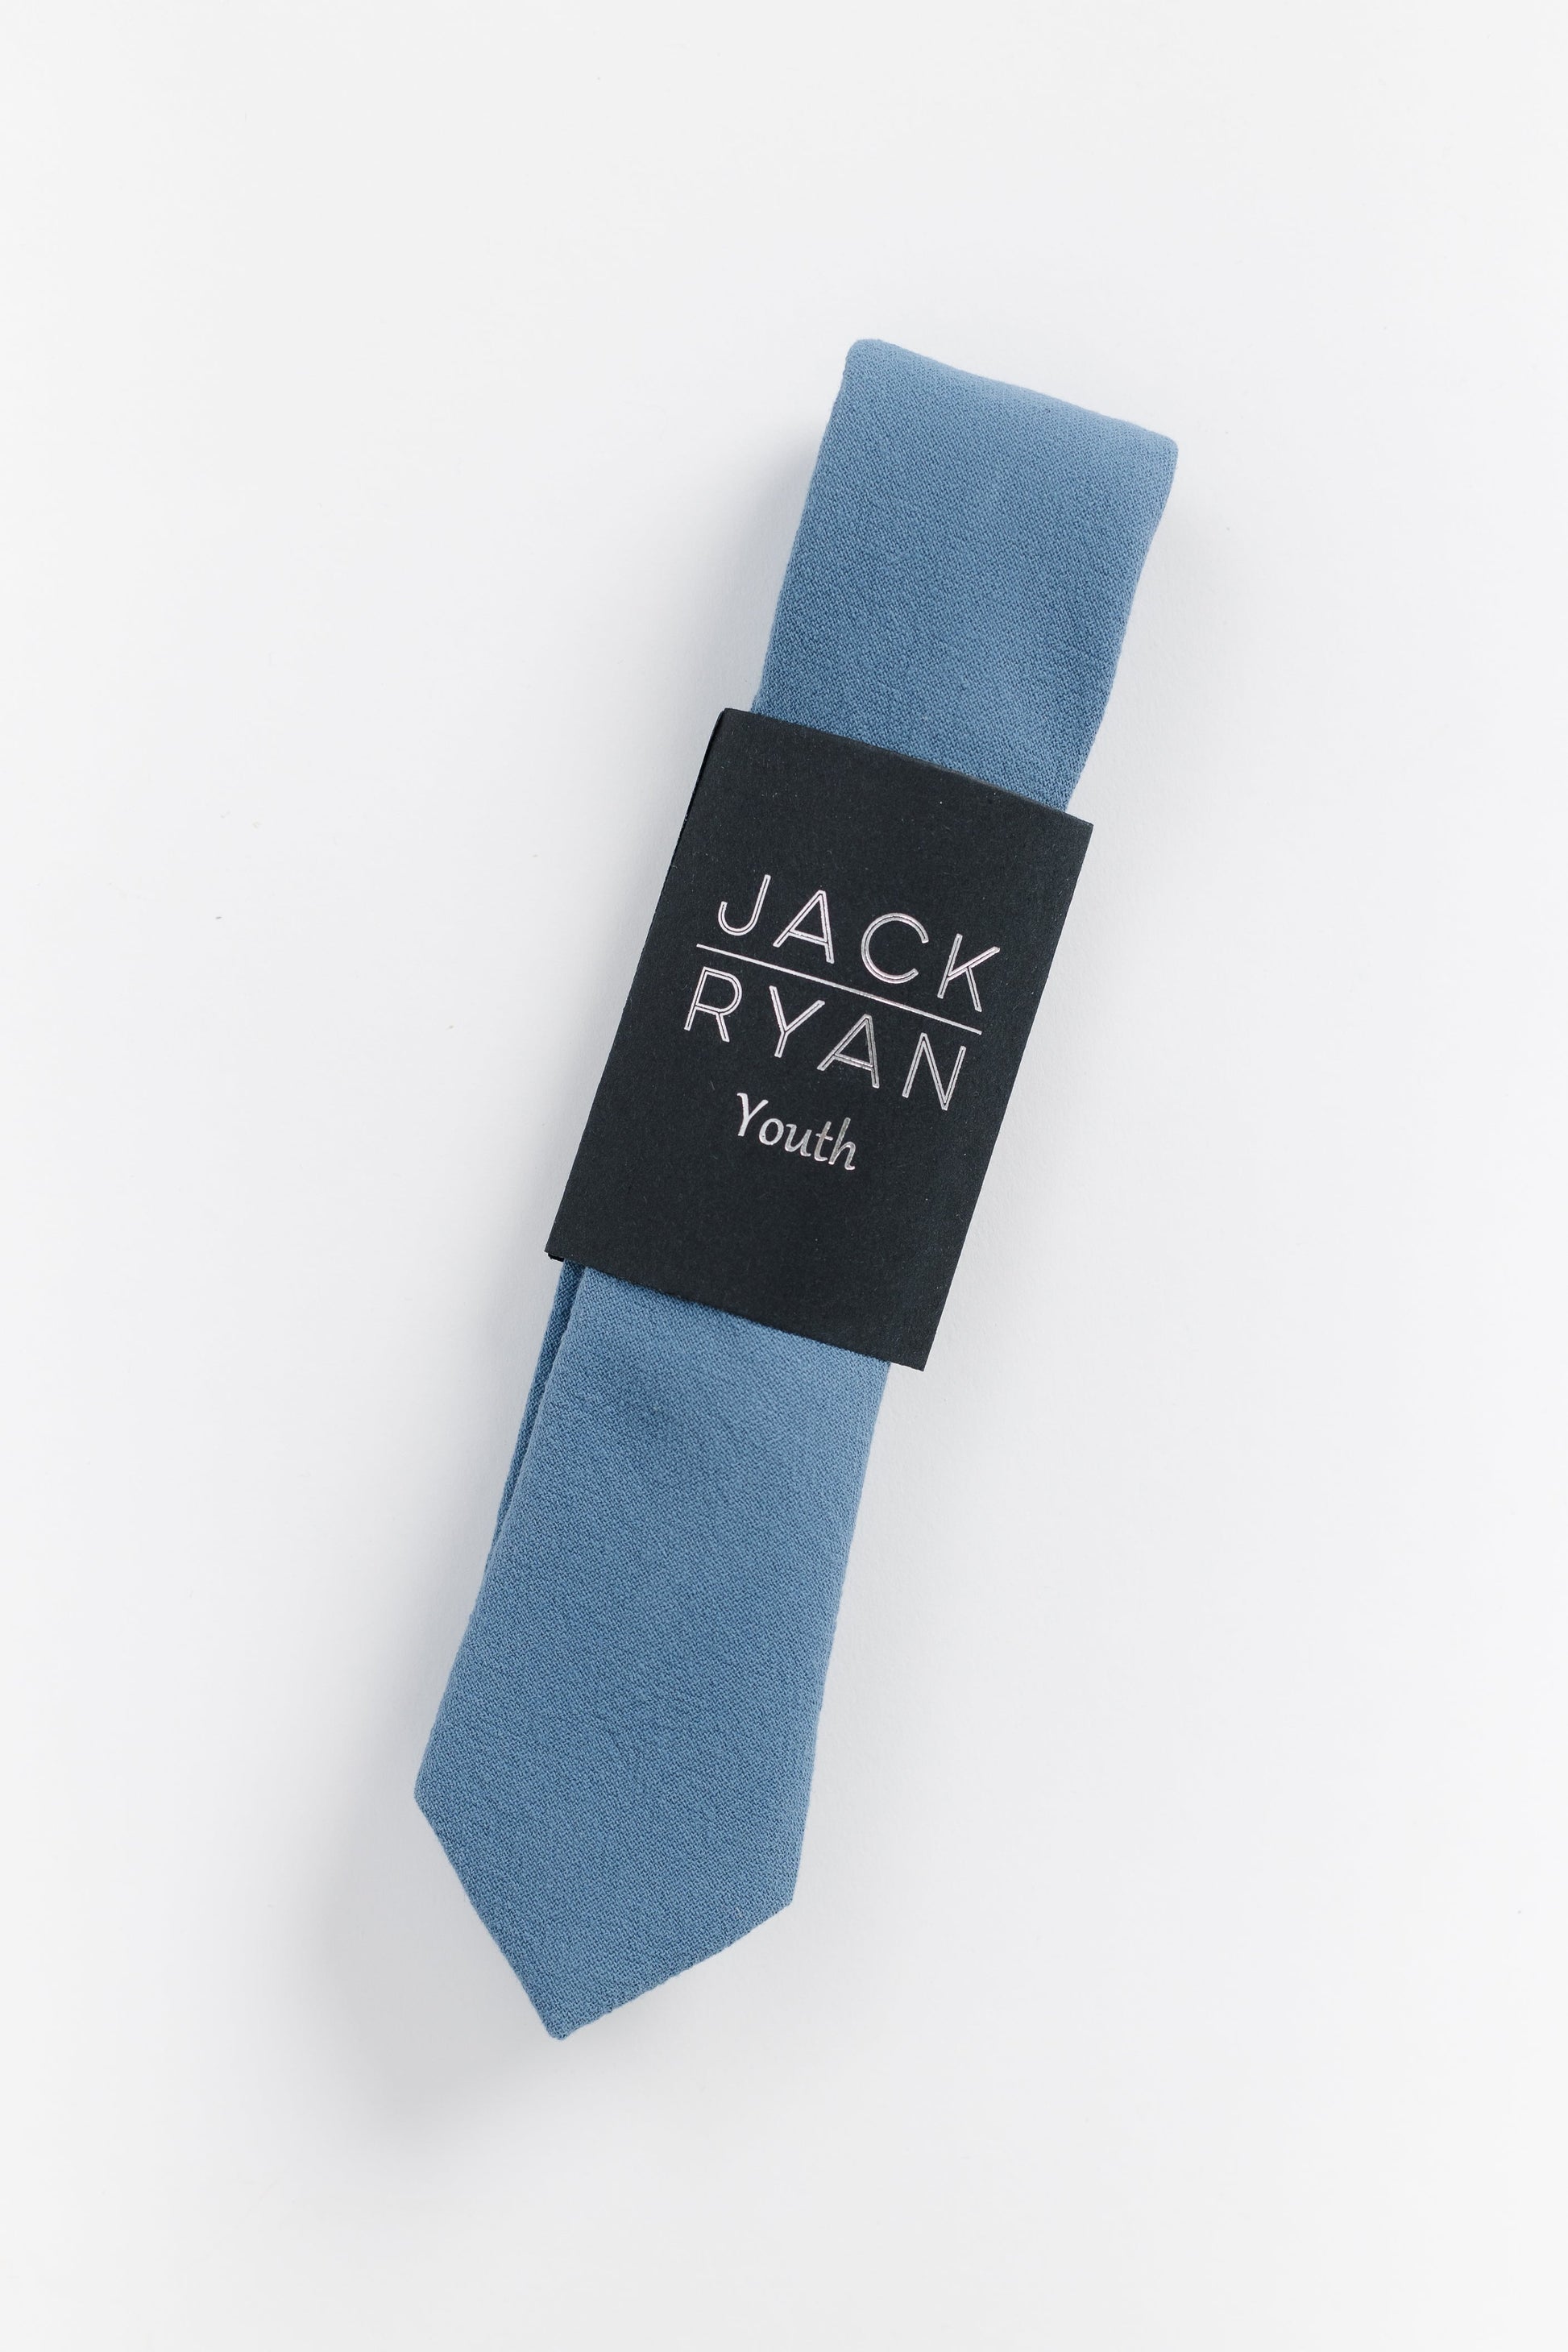 Jack Ryan Solid Collection MEN'S TIE JACK RYAN Dusty Blue Youth 48"L x 2"W 